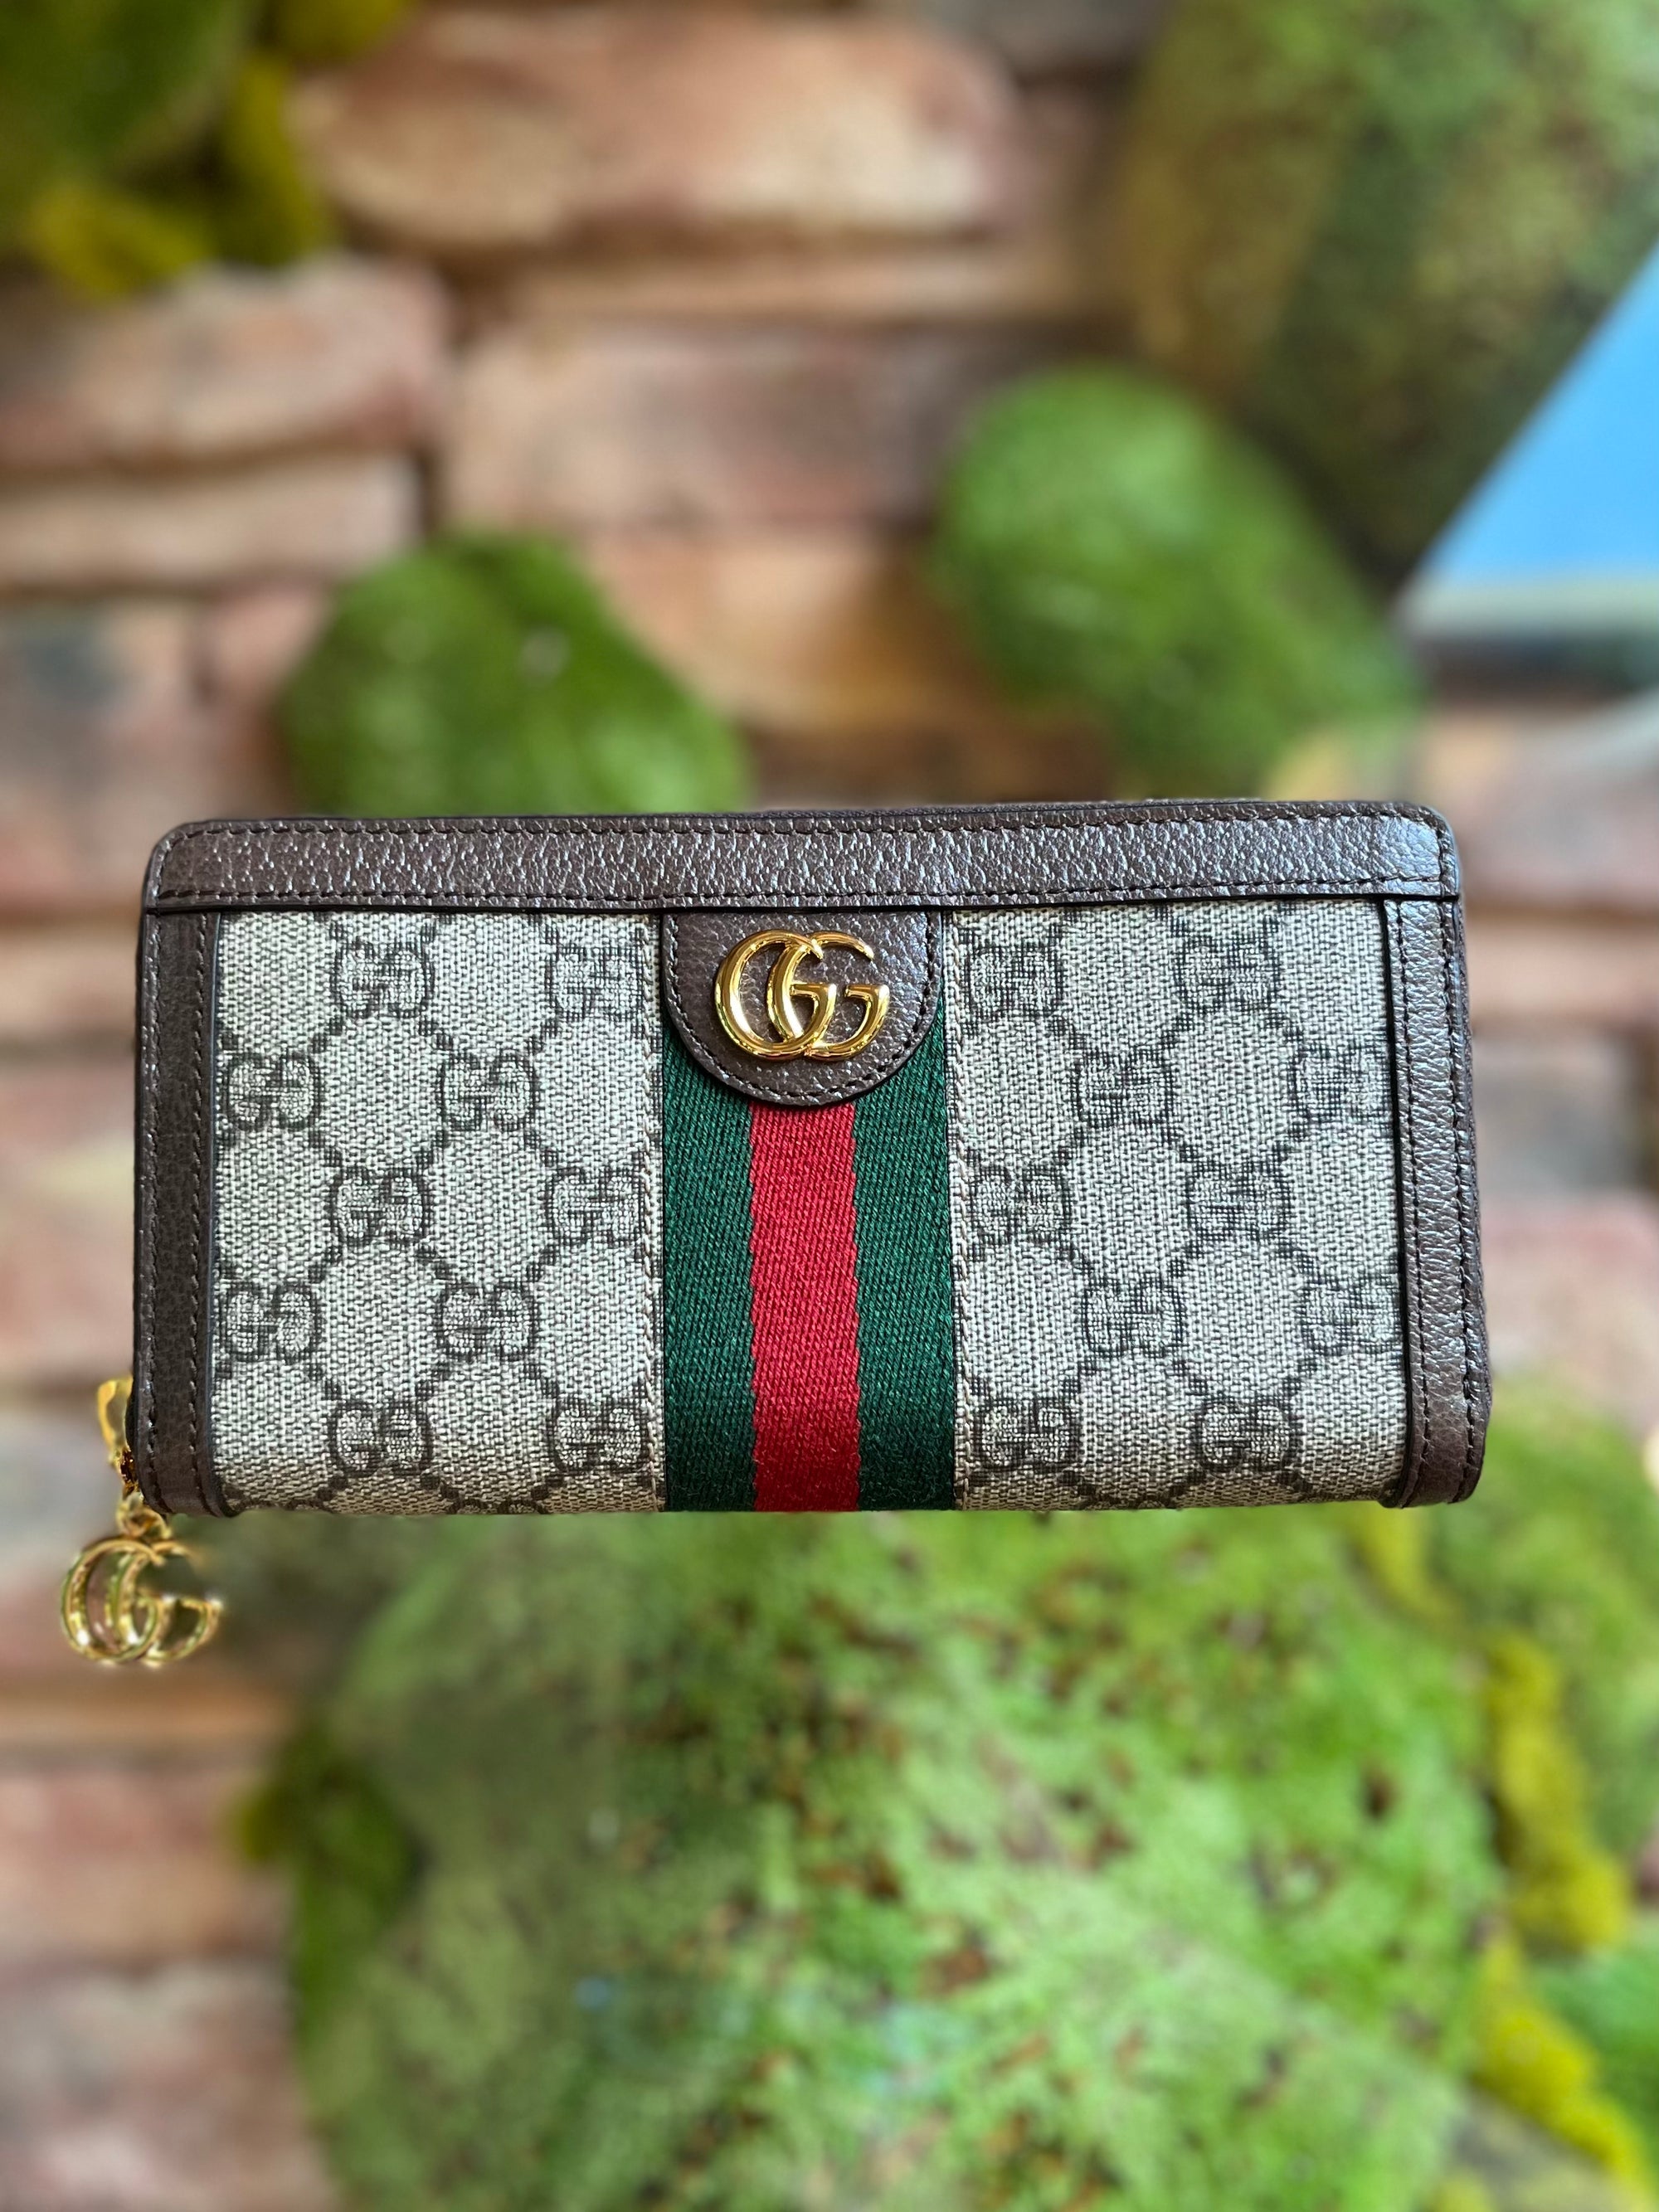 Gucci Ophidia Ophidia GG Continental Wallet 2022 Ss, Navy